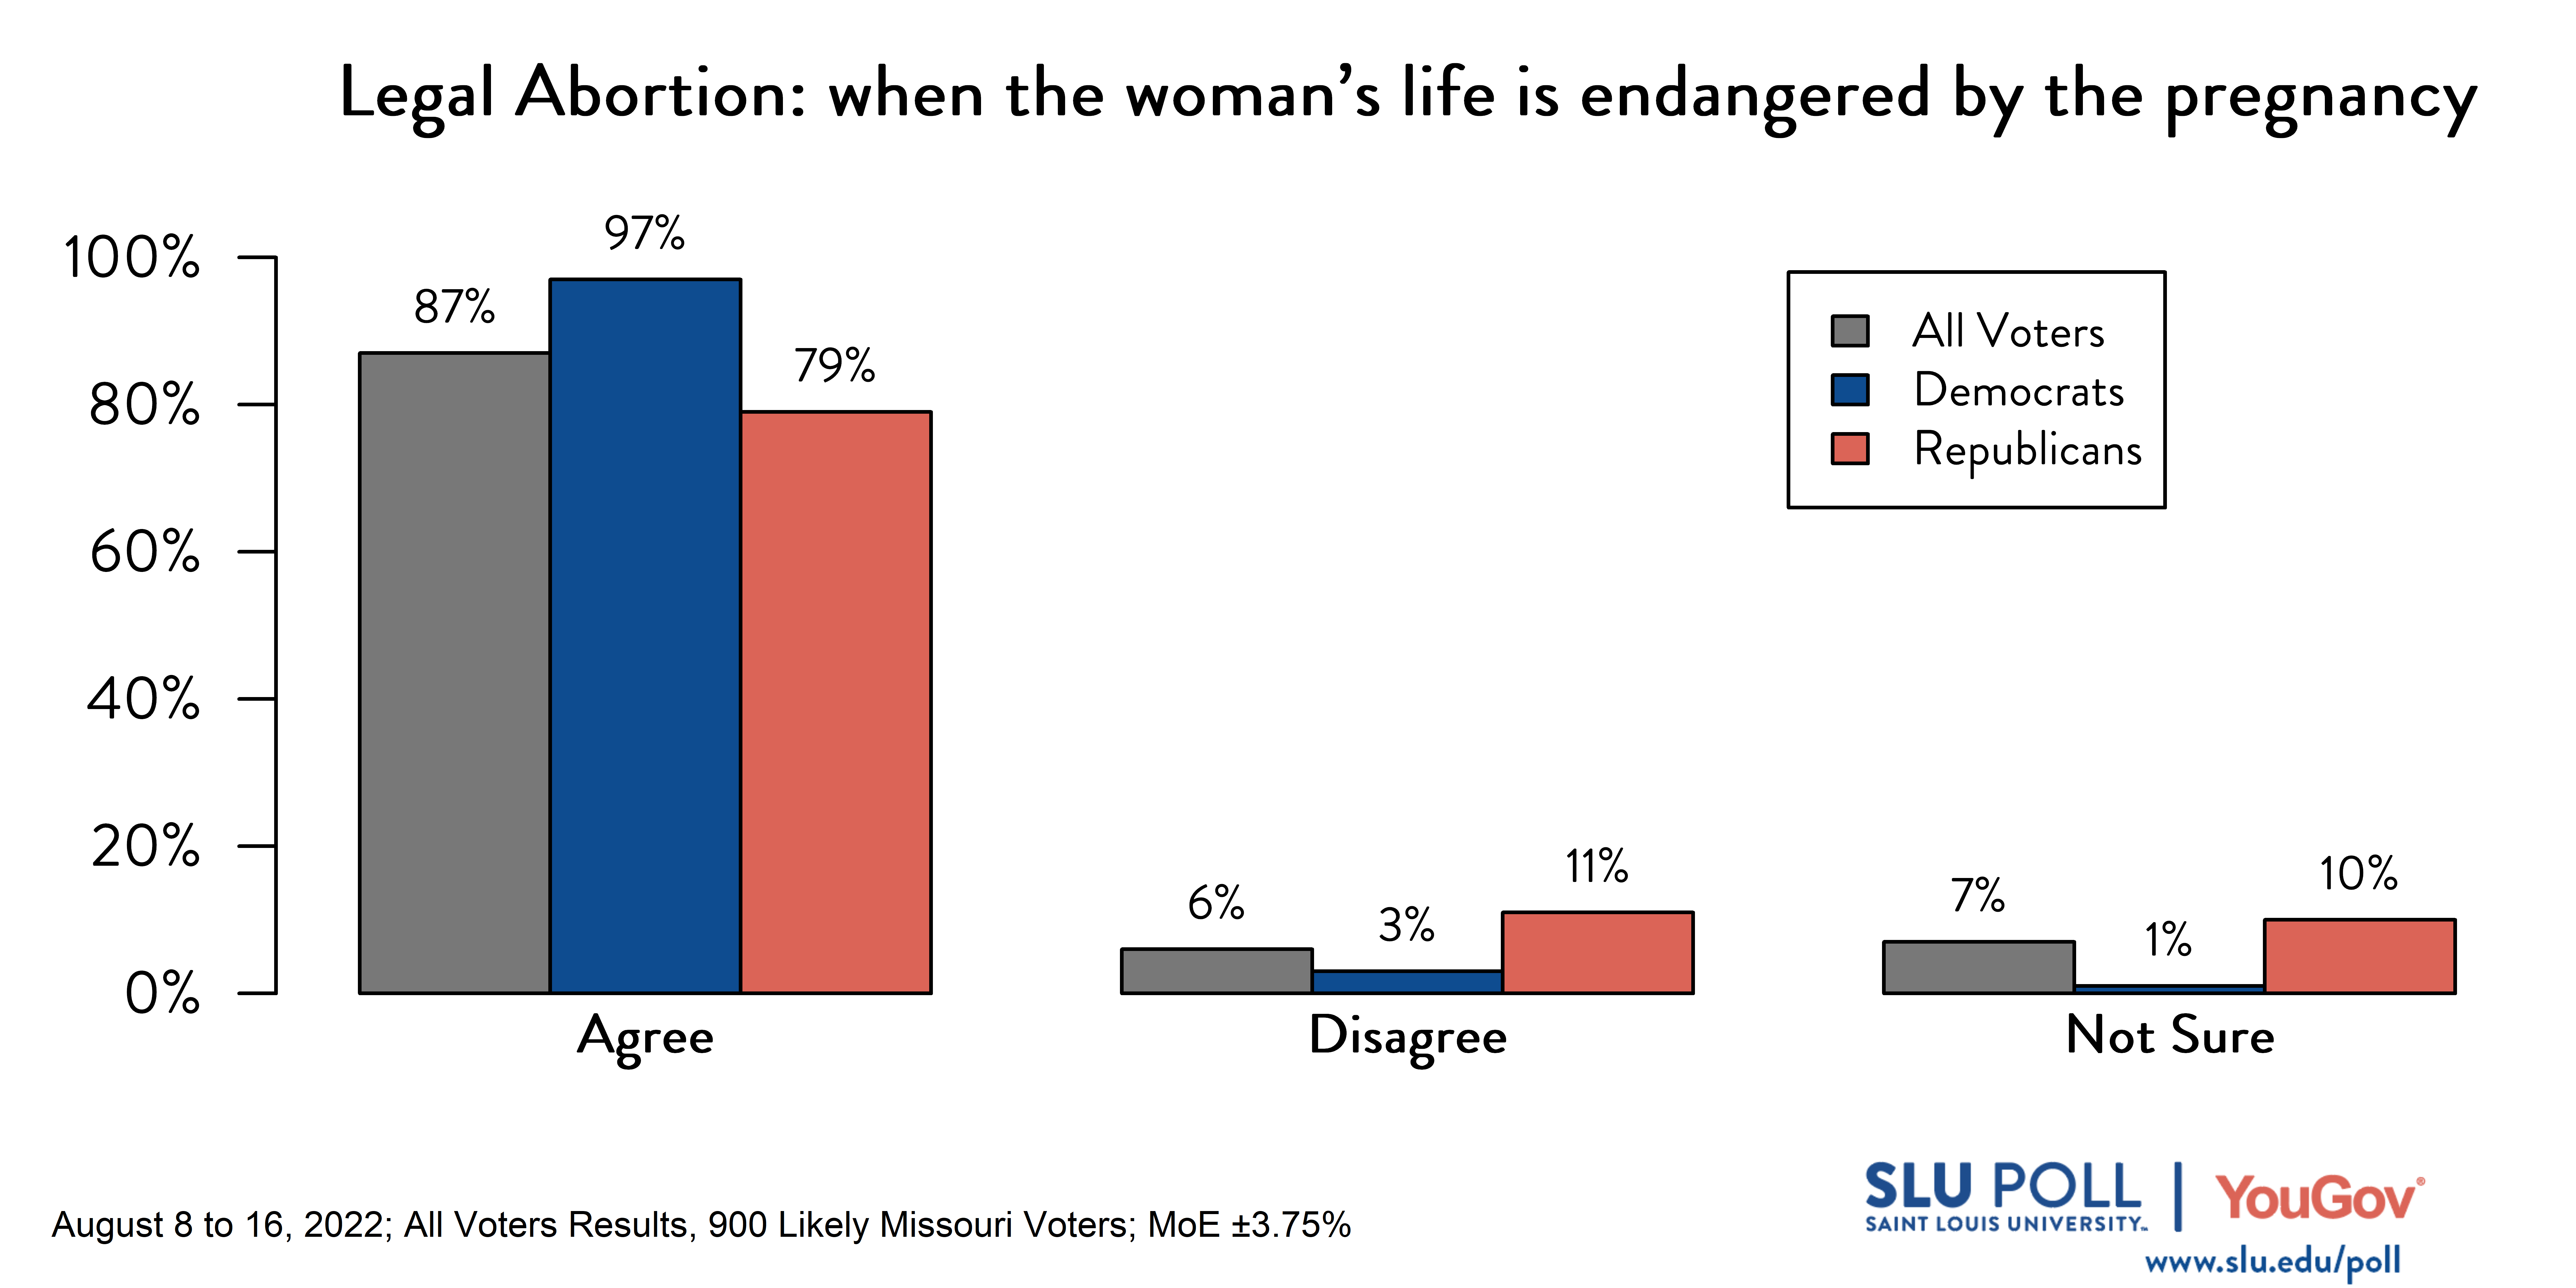 Likely voters' responses to 'Do you think it should be possible for a woman to legally obtain an abortion in the state of Missouri: when the woman's life is endangered by the pregnancy?': 87% Agree, 6% Disagree, and 7% Not Sure. Democratic voters' responses: ' 97% Agree, 3% Disagree, and 1% Not Sure. Republican voters' responses: 79% Agree, 11% Disagree, and 10% Not Sure. 